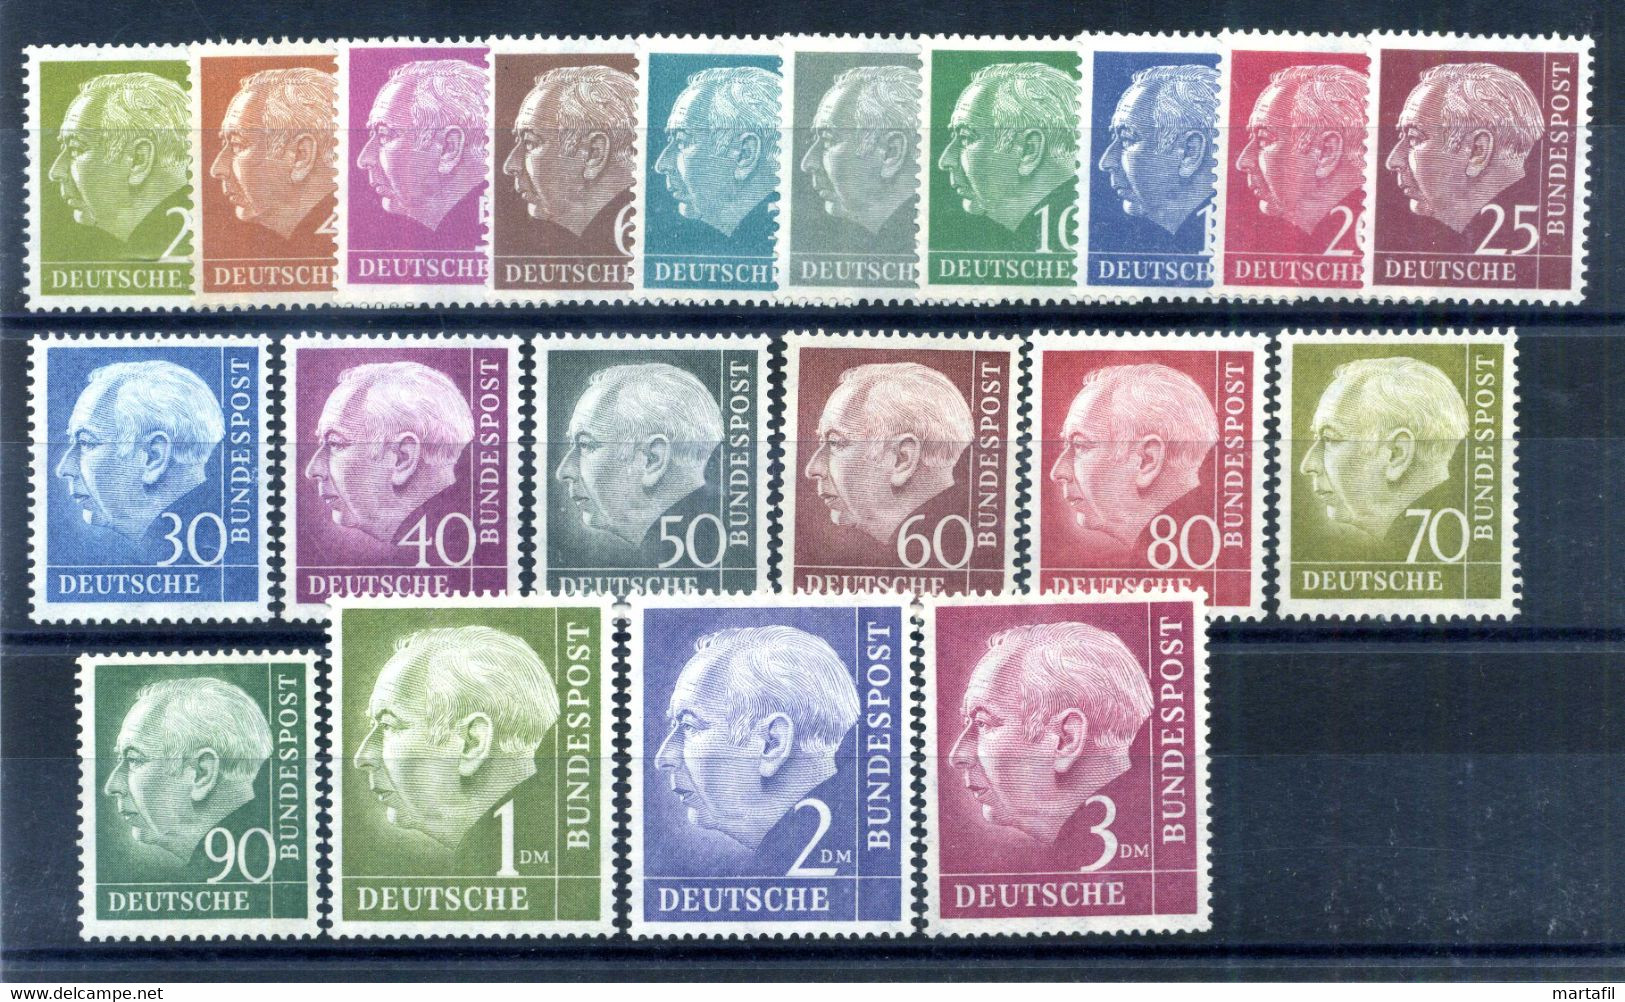 1954 REP. FED. TED. SET MNH ** Theodor Heuss, 50p Firmato Signed - Unused Stamps